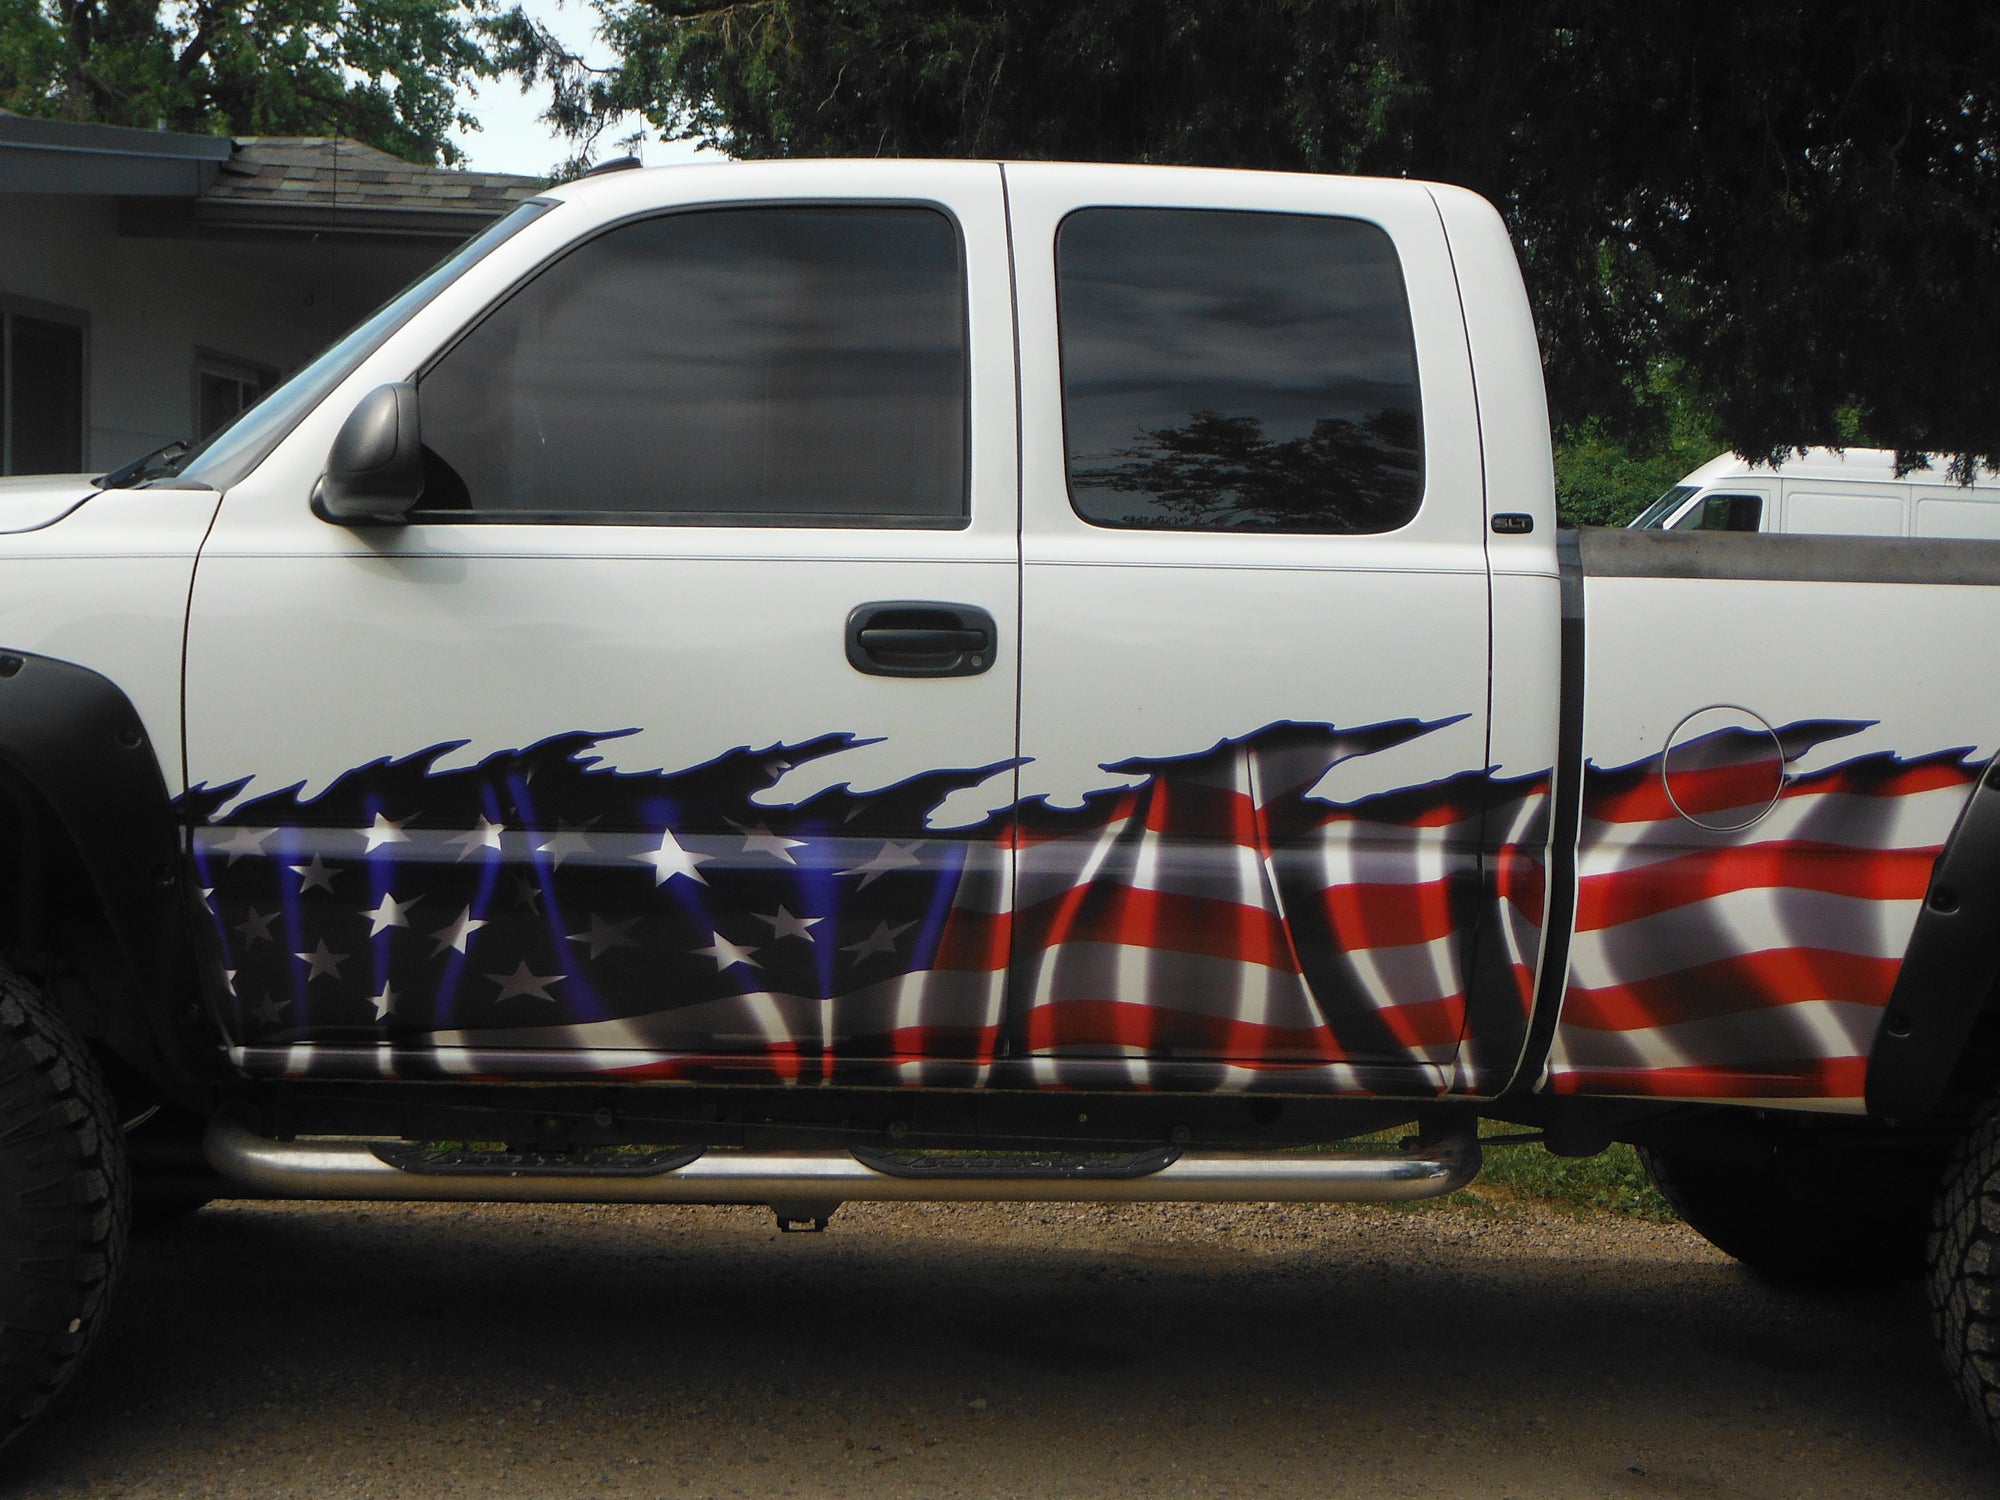 waving American flag decal on bottom half of white pick up truck